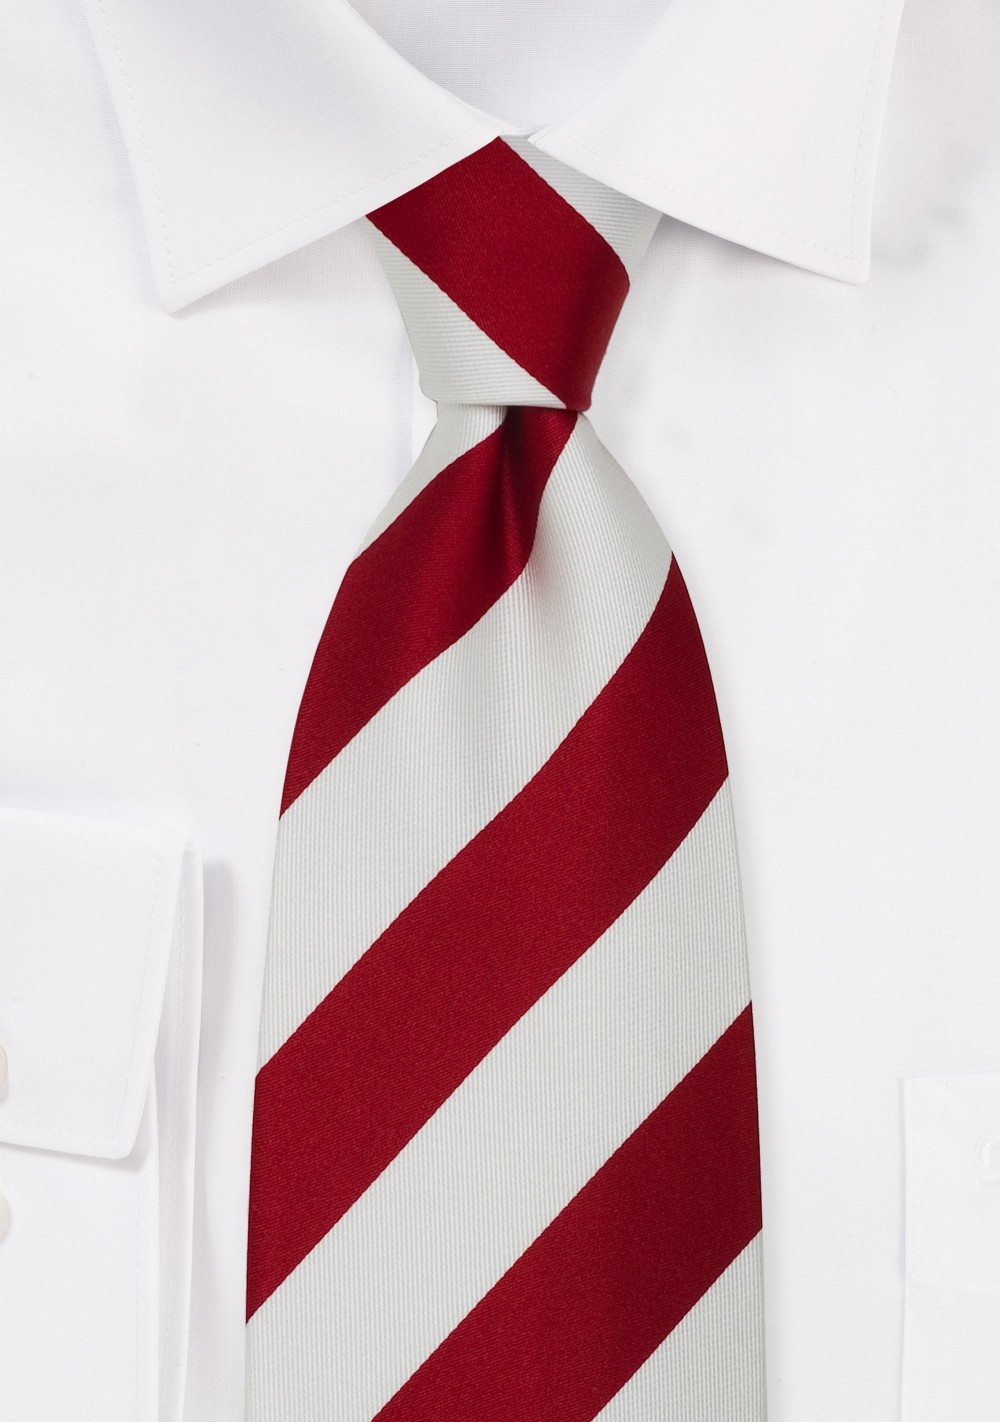 Extra Long Striped Ties - Striped Tie "Lighthouse" by Parsley